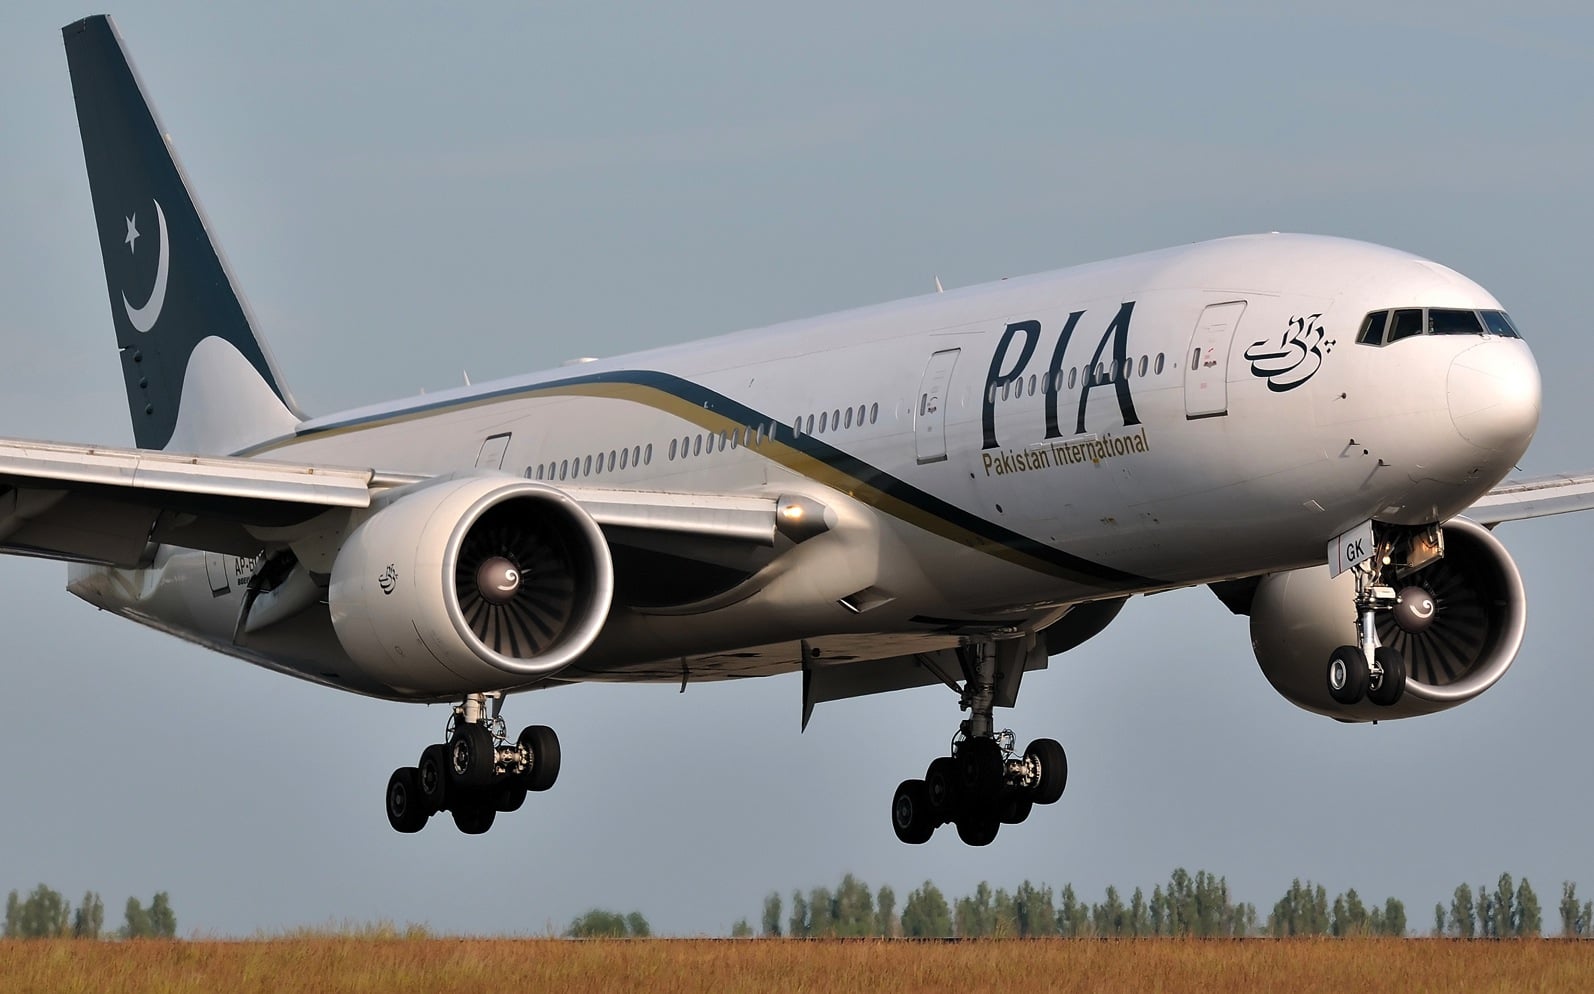 PIA has its engines revved to deliver wow-factor to its customers